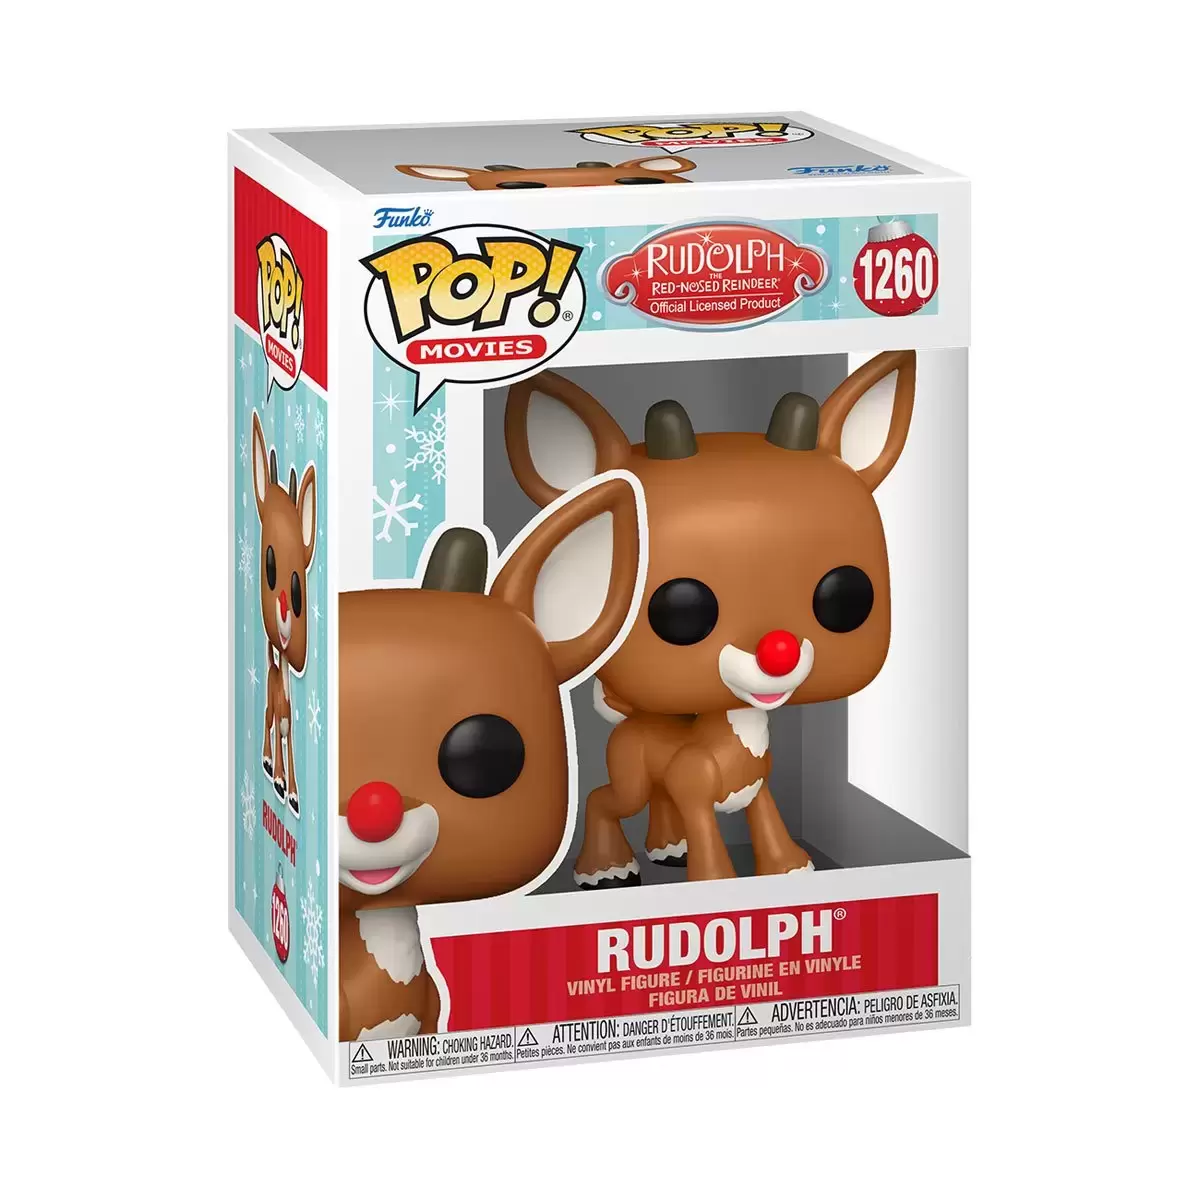 POP! Movies - Rudolph the Red-Nosed Reindeer - Rudolph